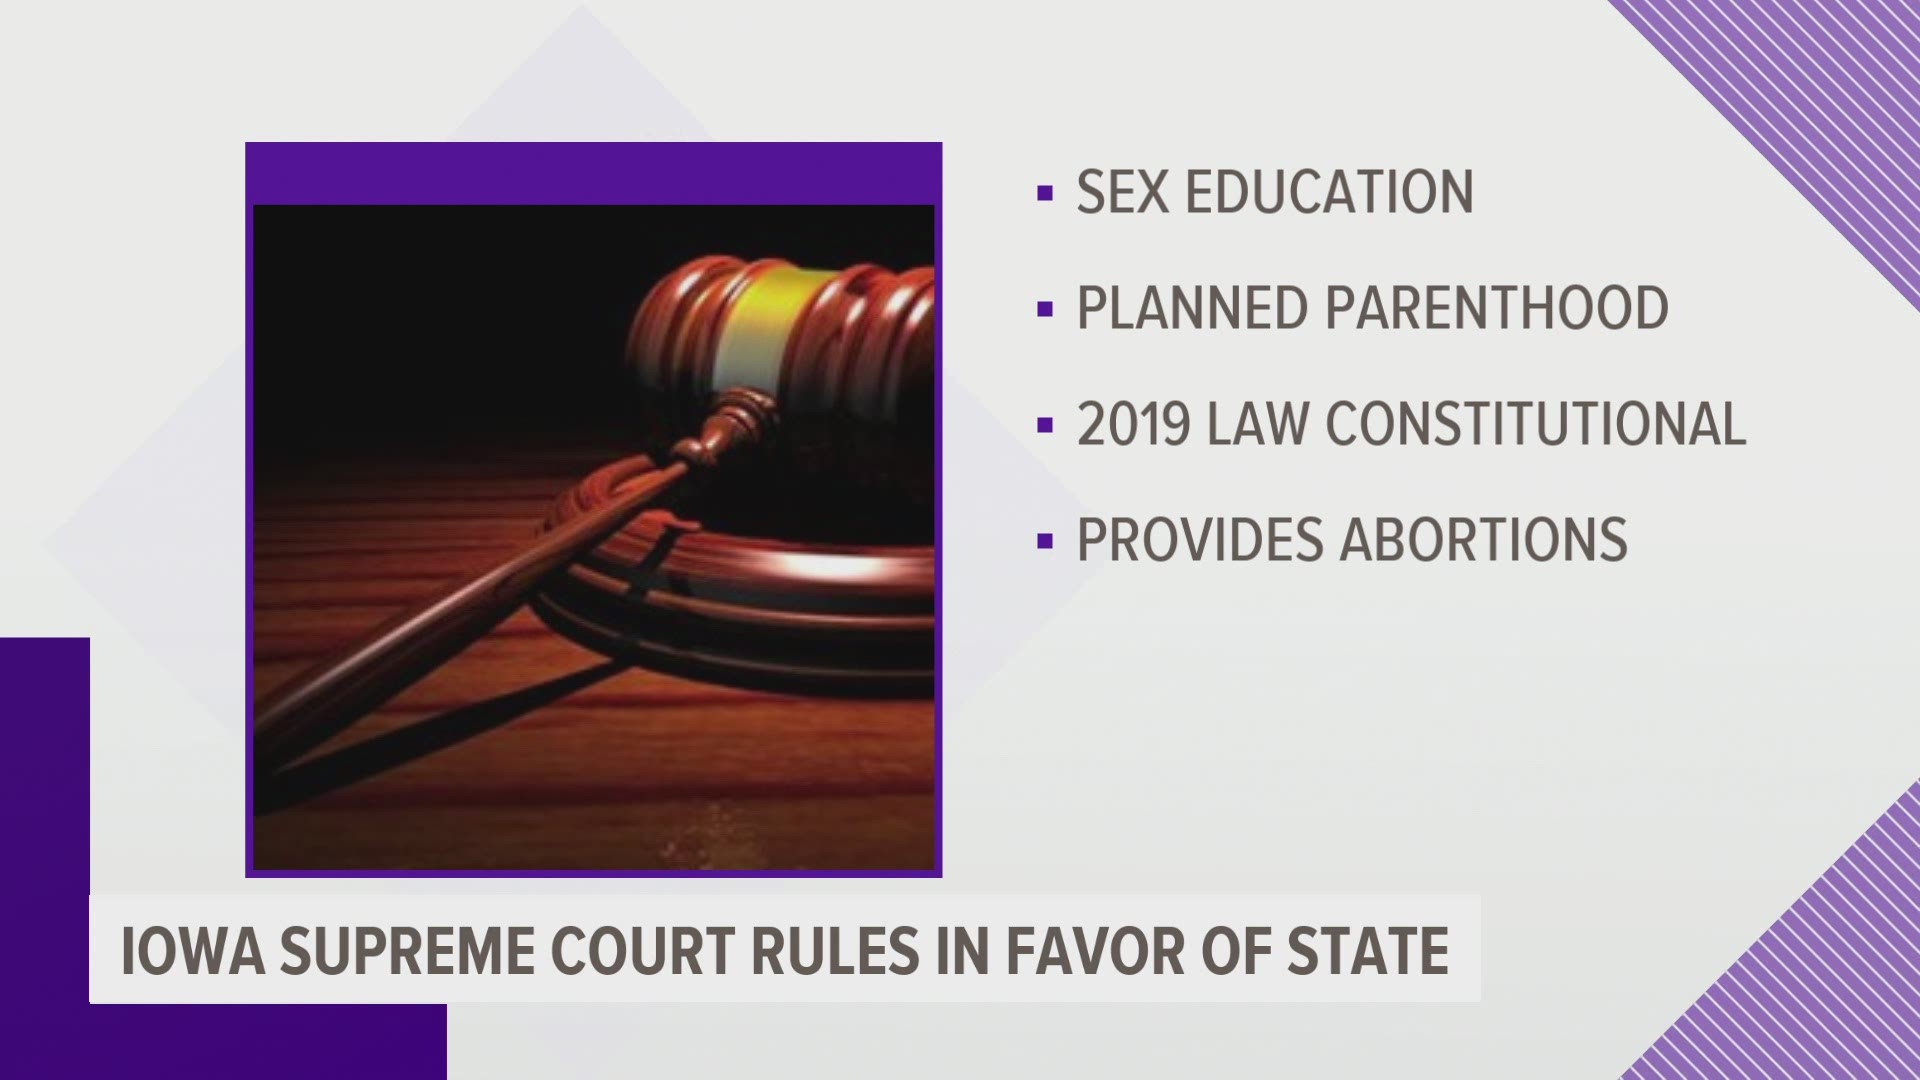 On the final day of its term, the Iowa Supreme Court ruled the state does not need to fund two Planned Parenthood sex education programs.